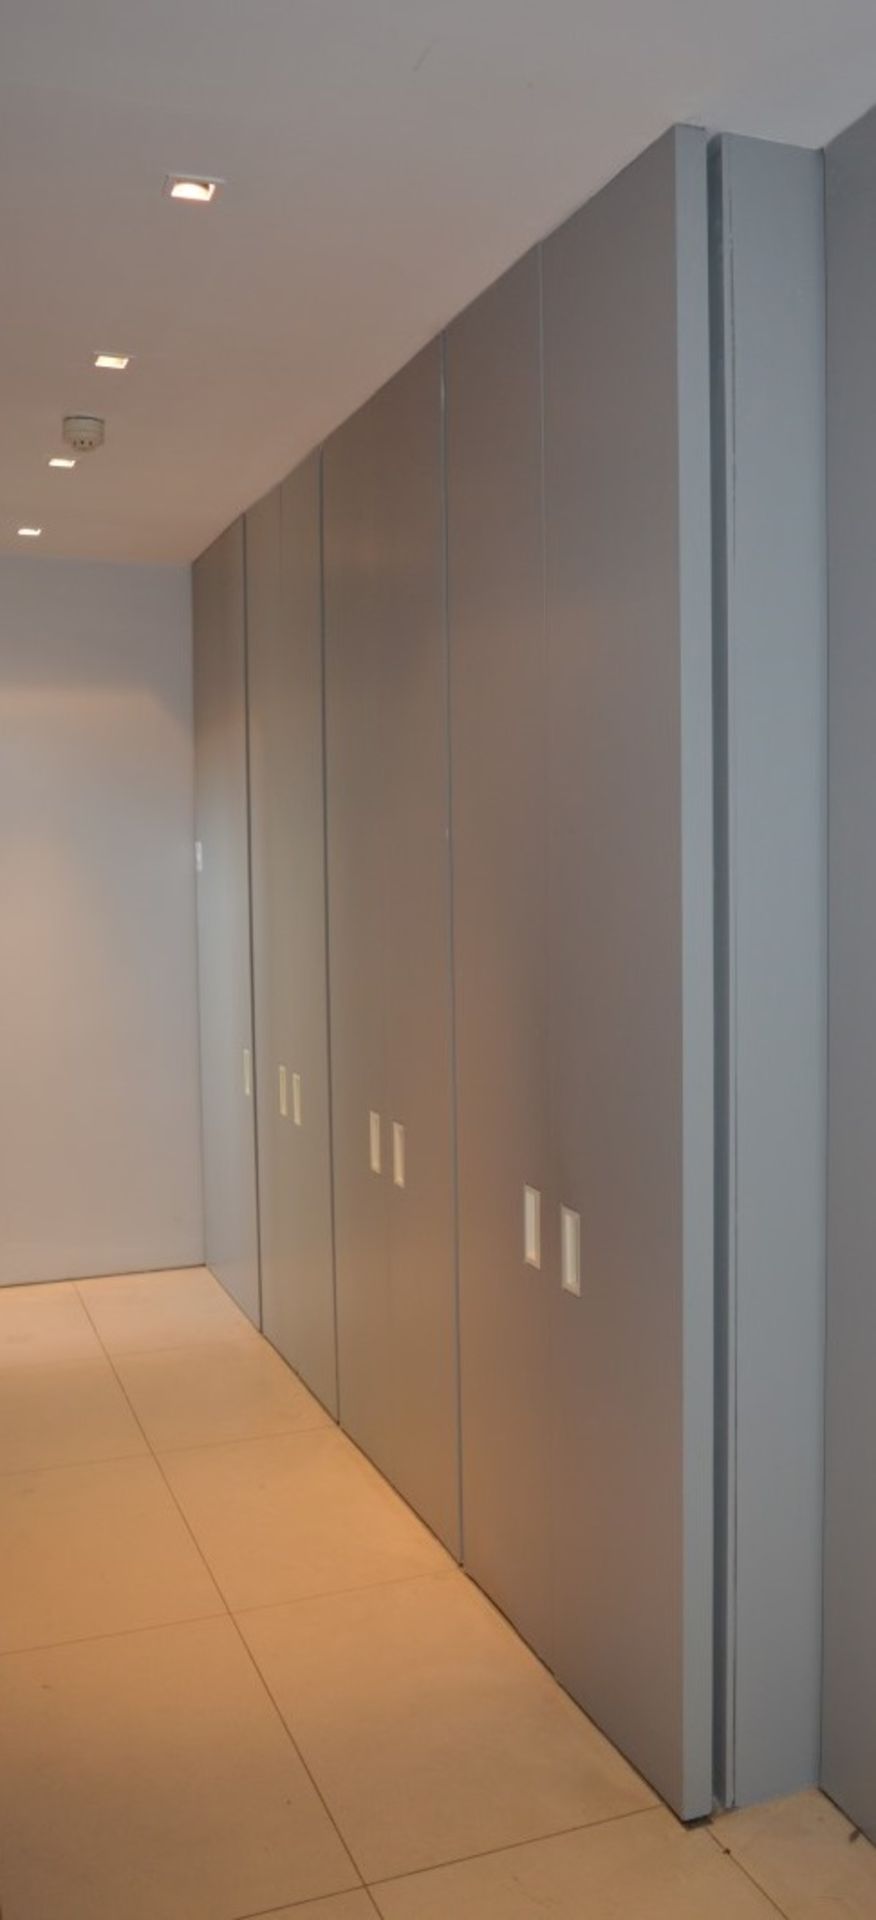 7 x Storage Cupboard Doors With Integrated Handles - Large Substantial Size Covering an Area of 12ft